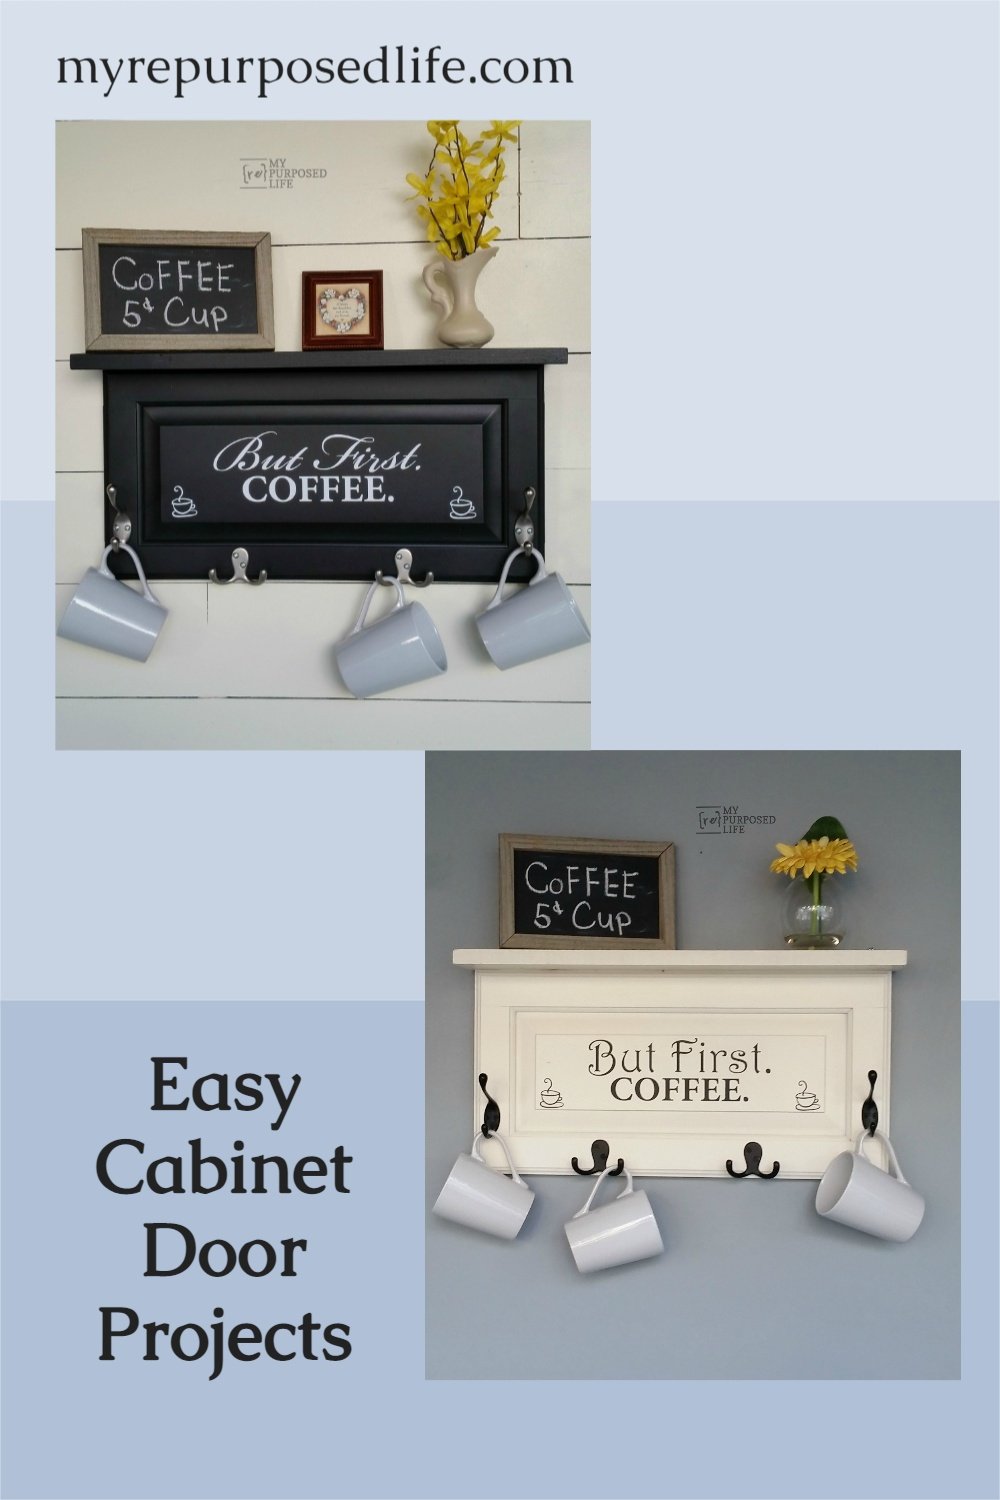 How to turn old cabinet doors into shelves or signs. Perfect home decor for coffee lovers. Coffee Cup Rack ideas for your kitchen. Step by step directions and tips to make your own shelf this weekend. #repurposed #cabinetdoor #coffeelovers #shelf #kitchen #decor #MyRepurposedLife via @repurposedlife